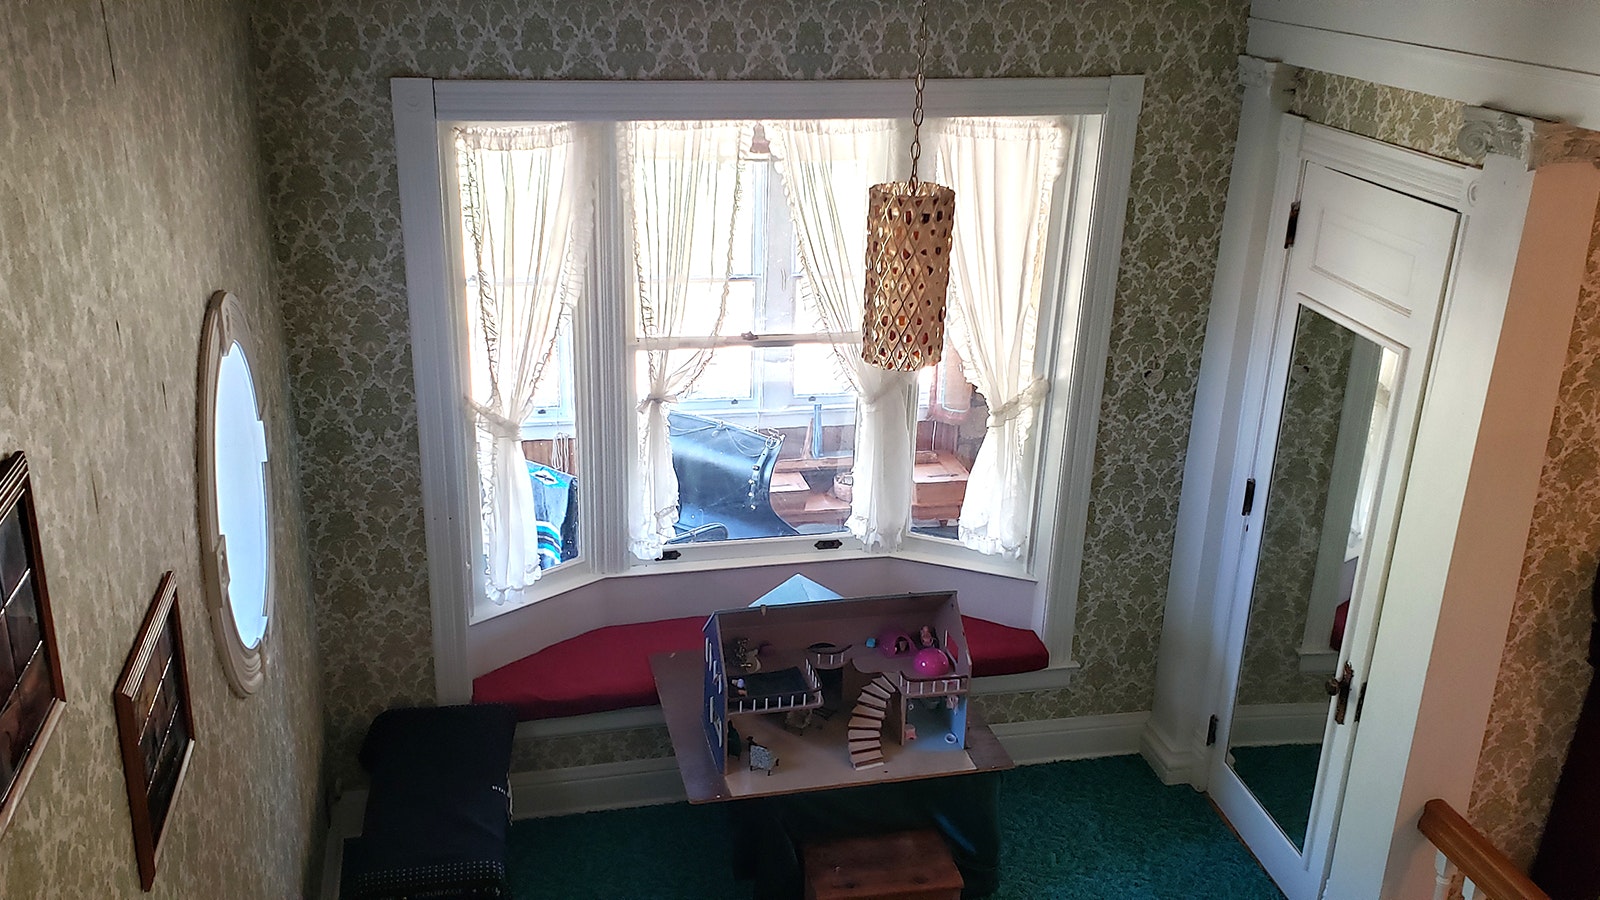 A dollhouse placed near a window at the J.B. Okie Mansion.